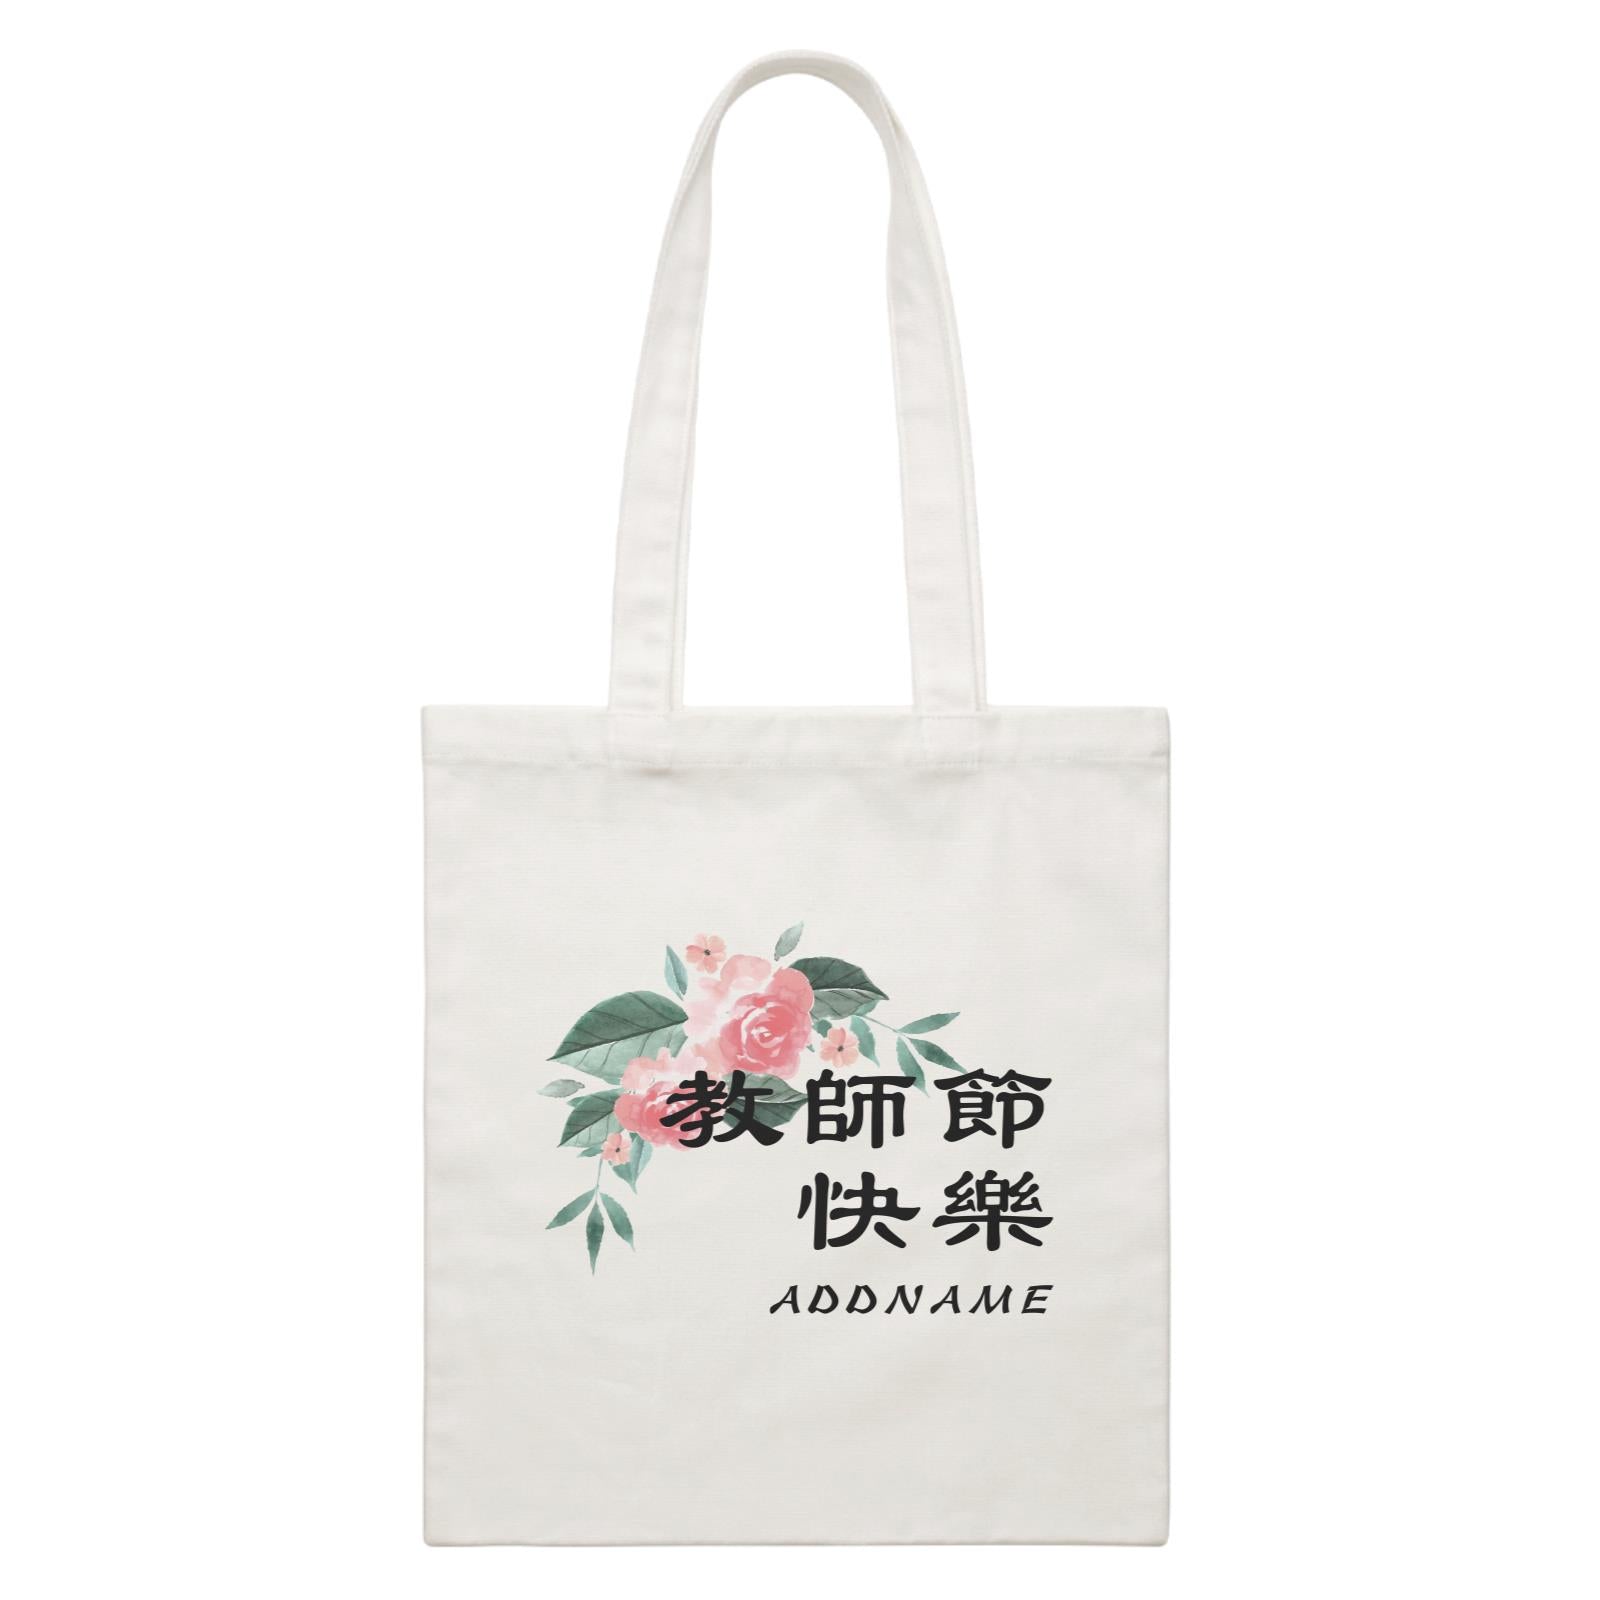 Watercolour Happy Teachers Day Chinese Addname White Canvas Bag